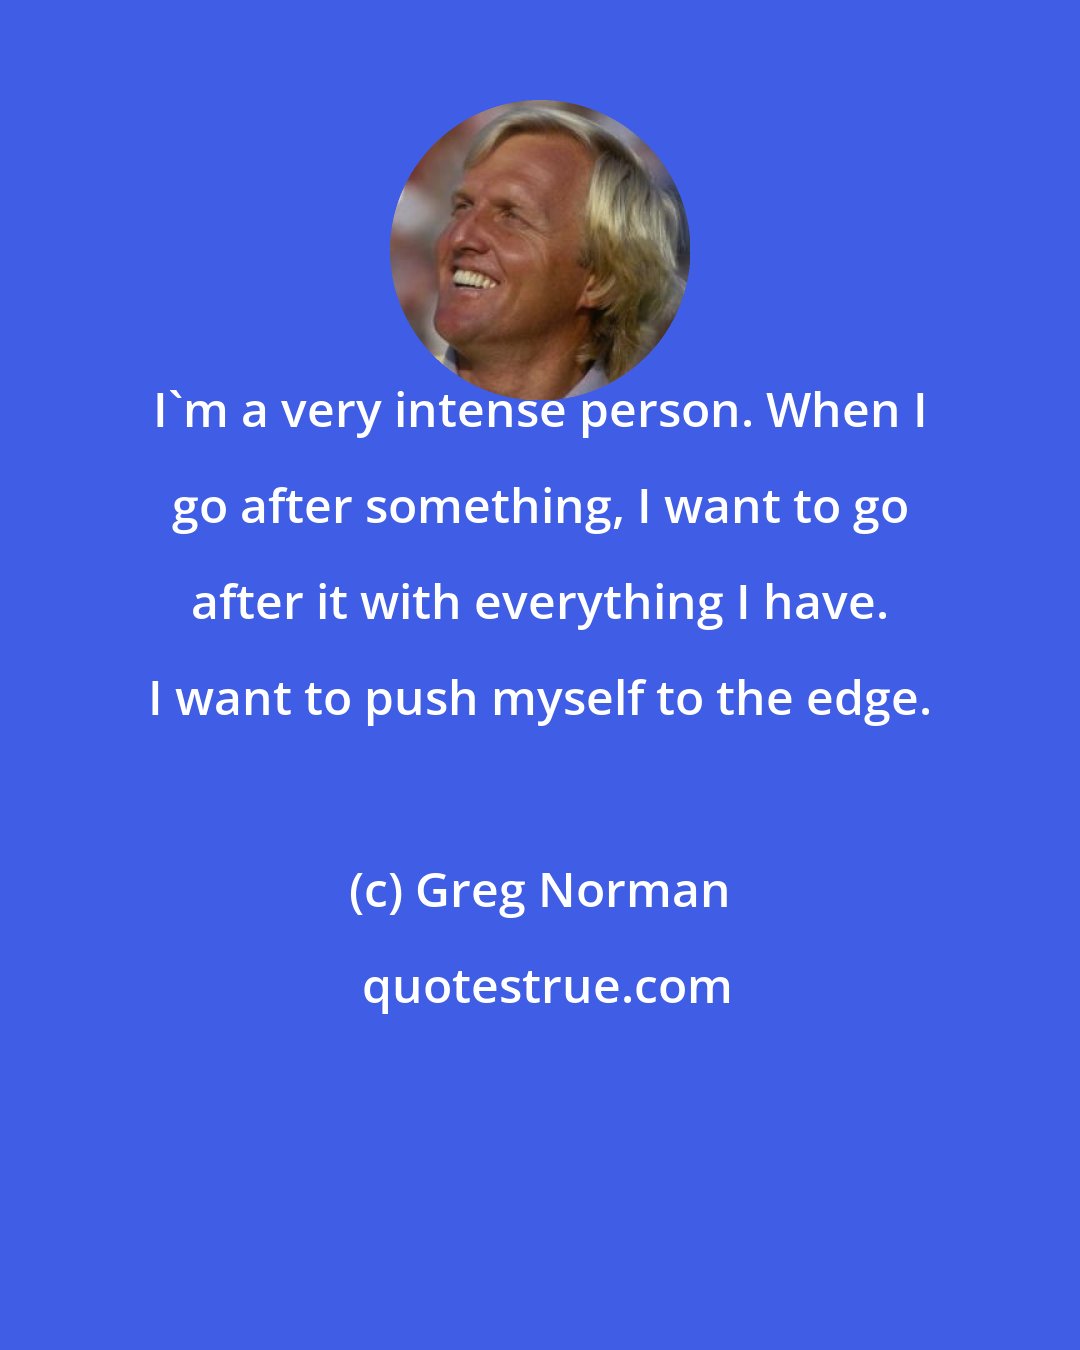 Greg Norman: I'm a very intense person. When I go after something, I want to go after it with everything I have. I want to push myself to the edge.